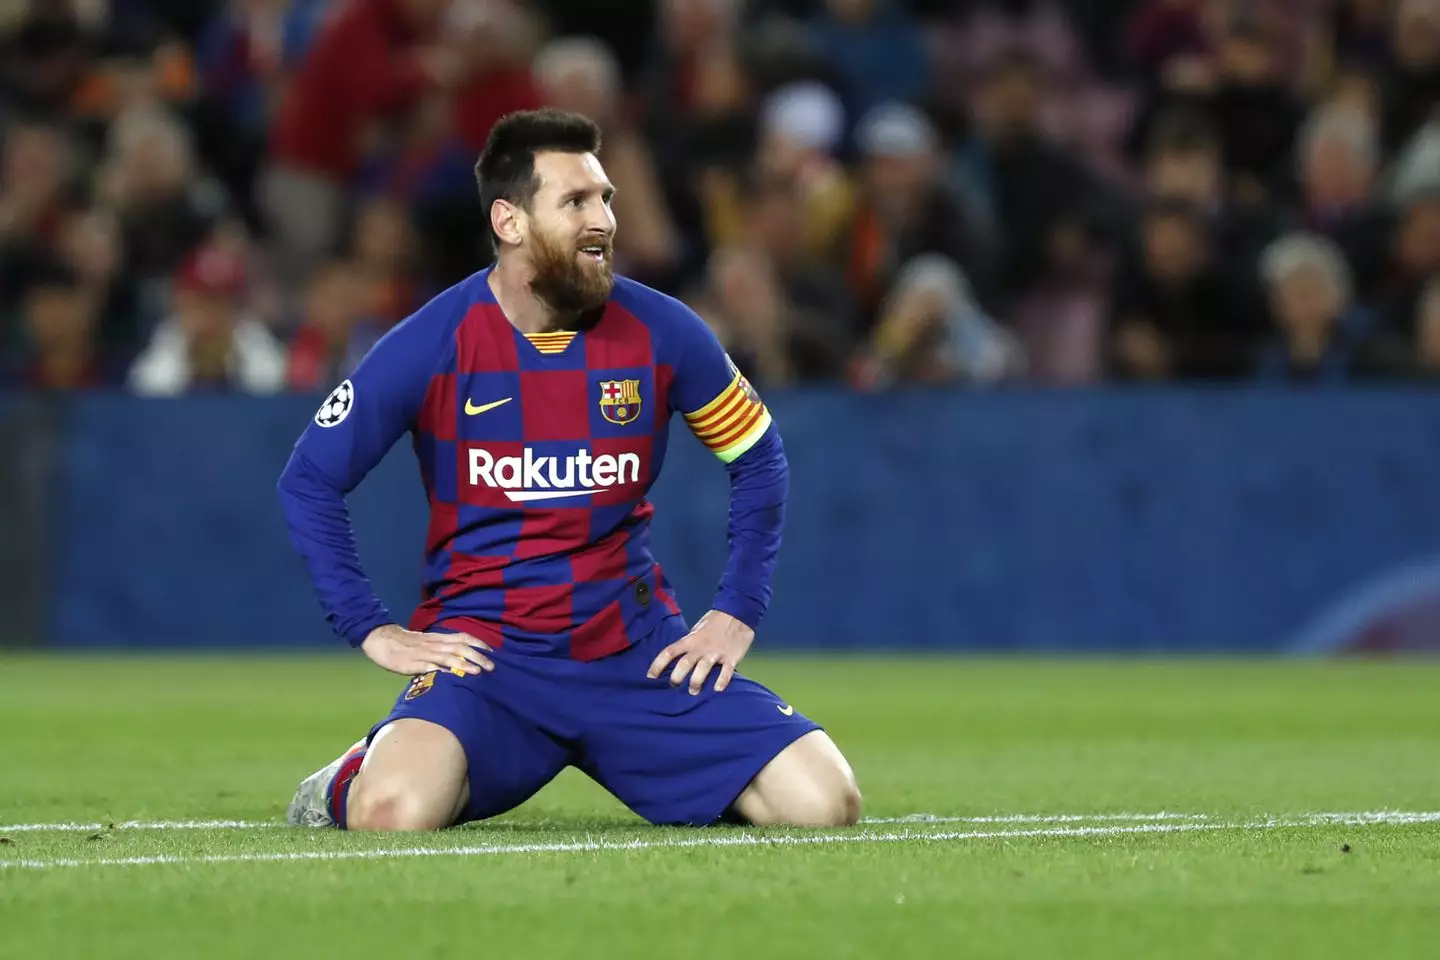 Barcelona officially announced this week that club legend Lionel Messi would not be returning to the club